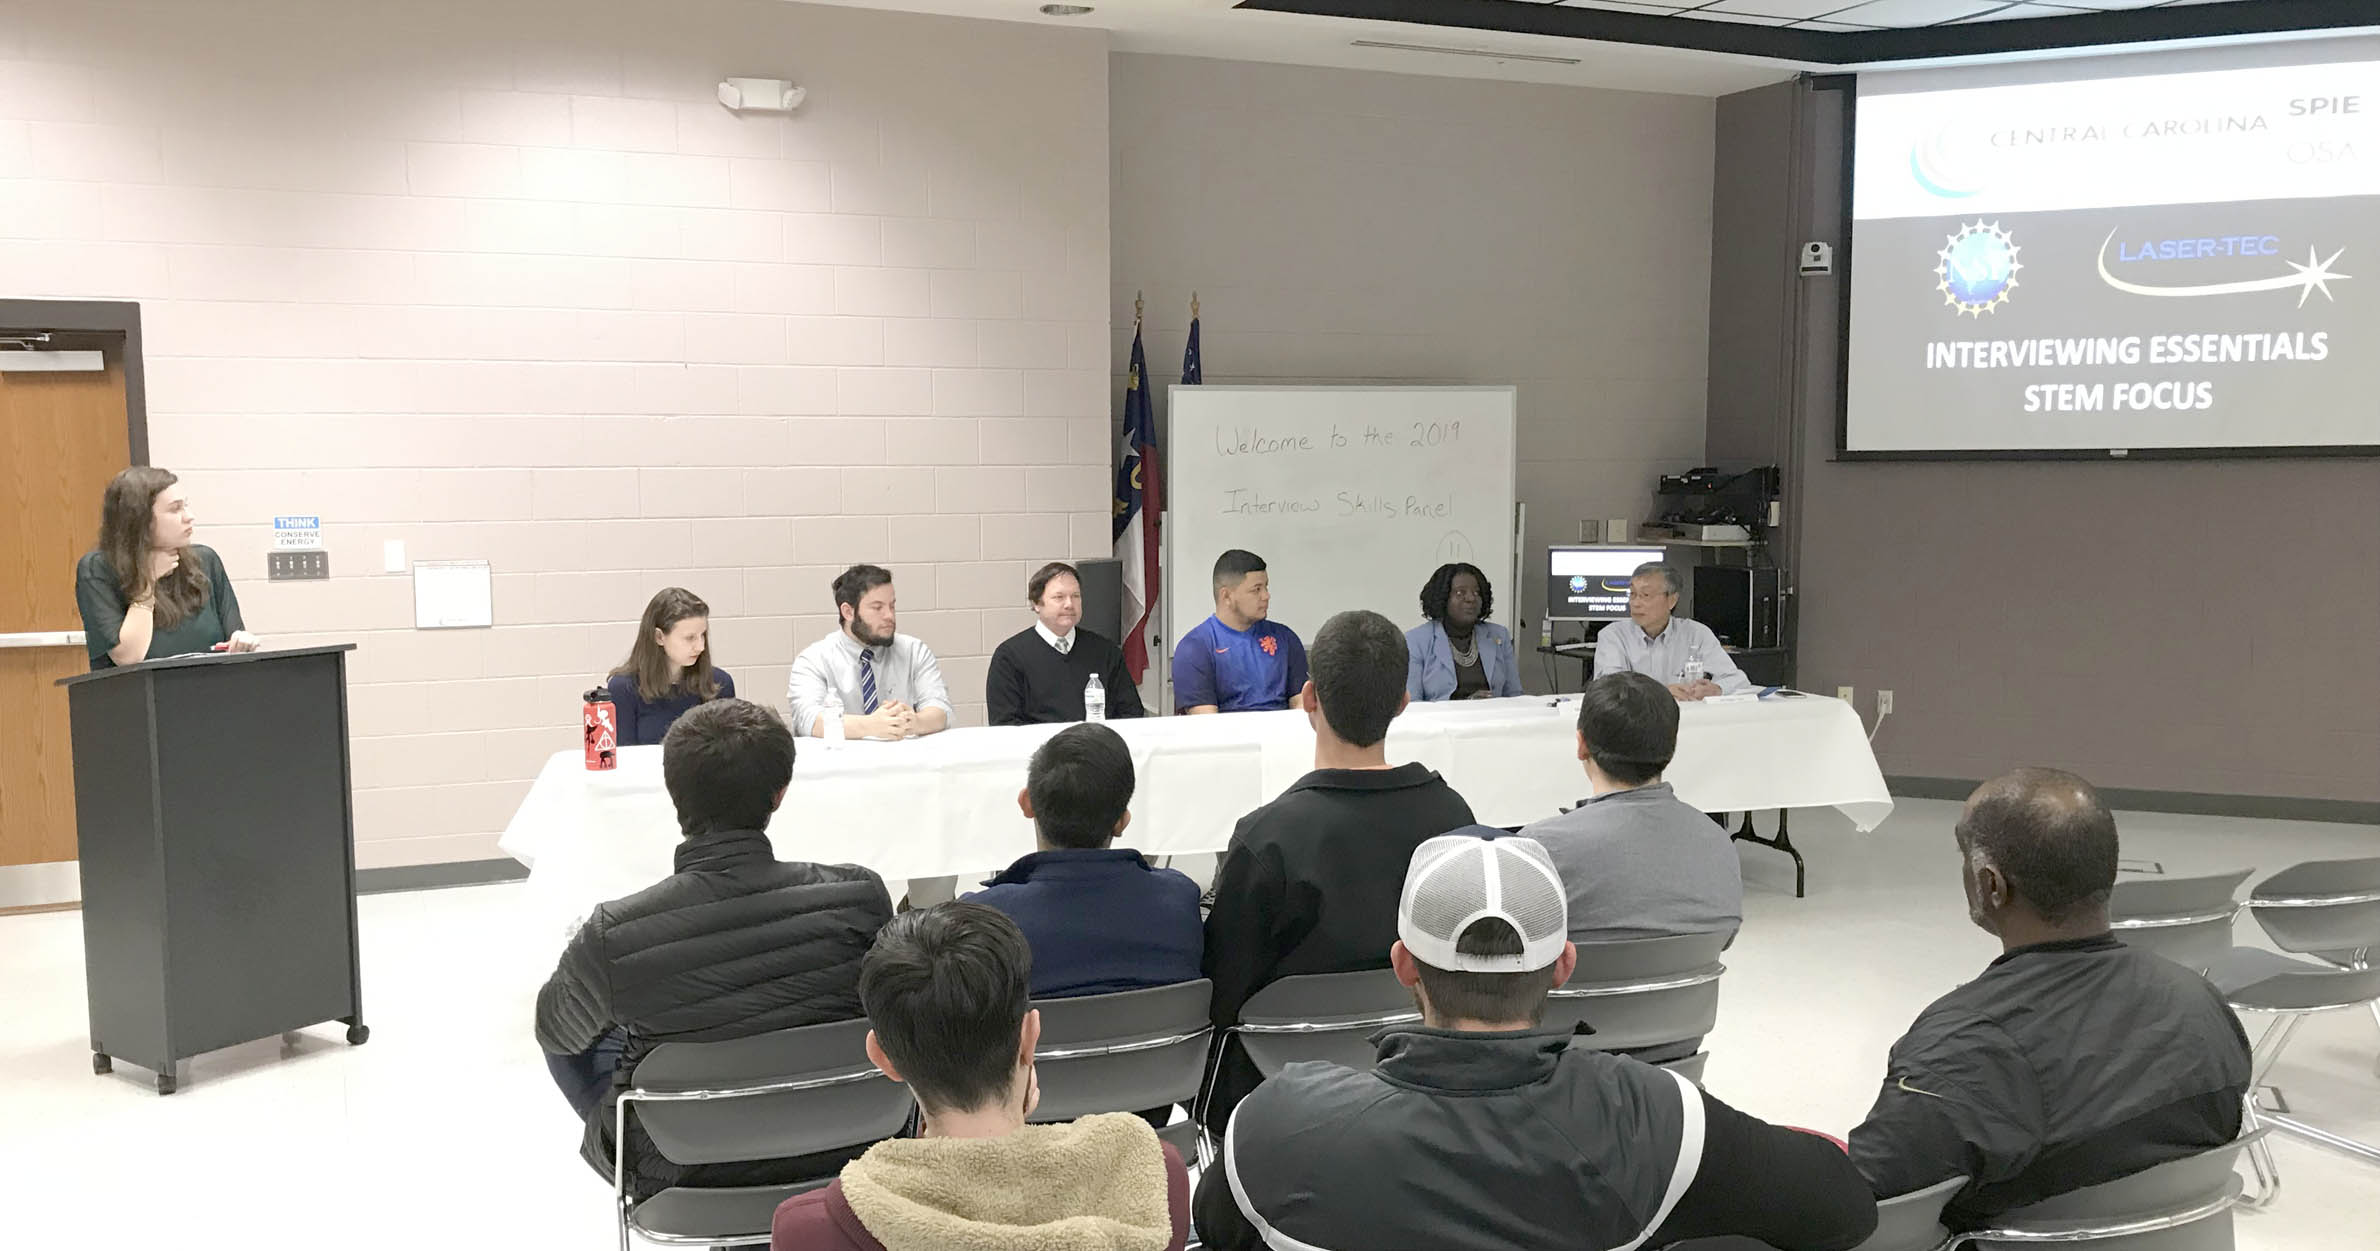 Read the full story, CCCC SPIE Student Chapter hosts 'Interviewing Skills Panel' event